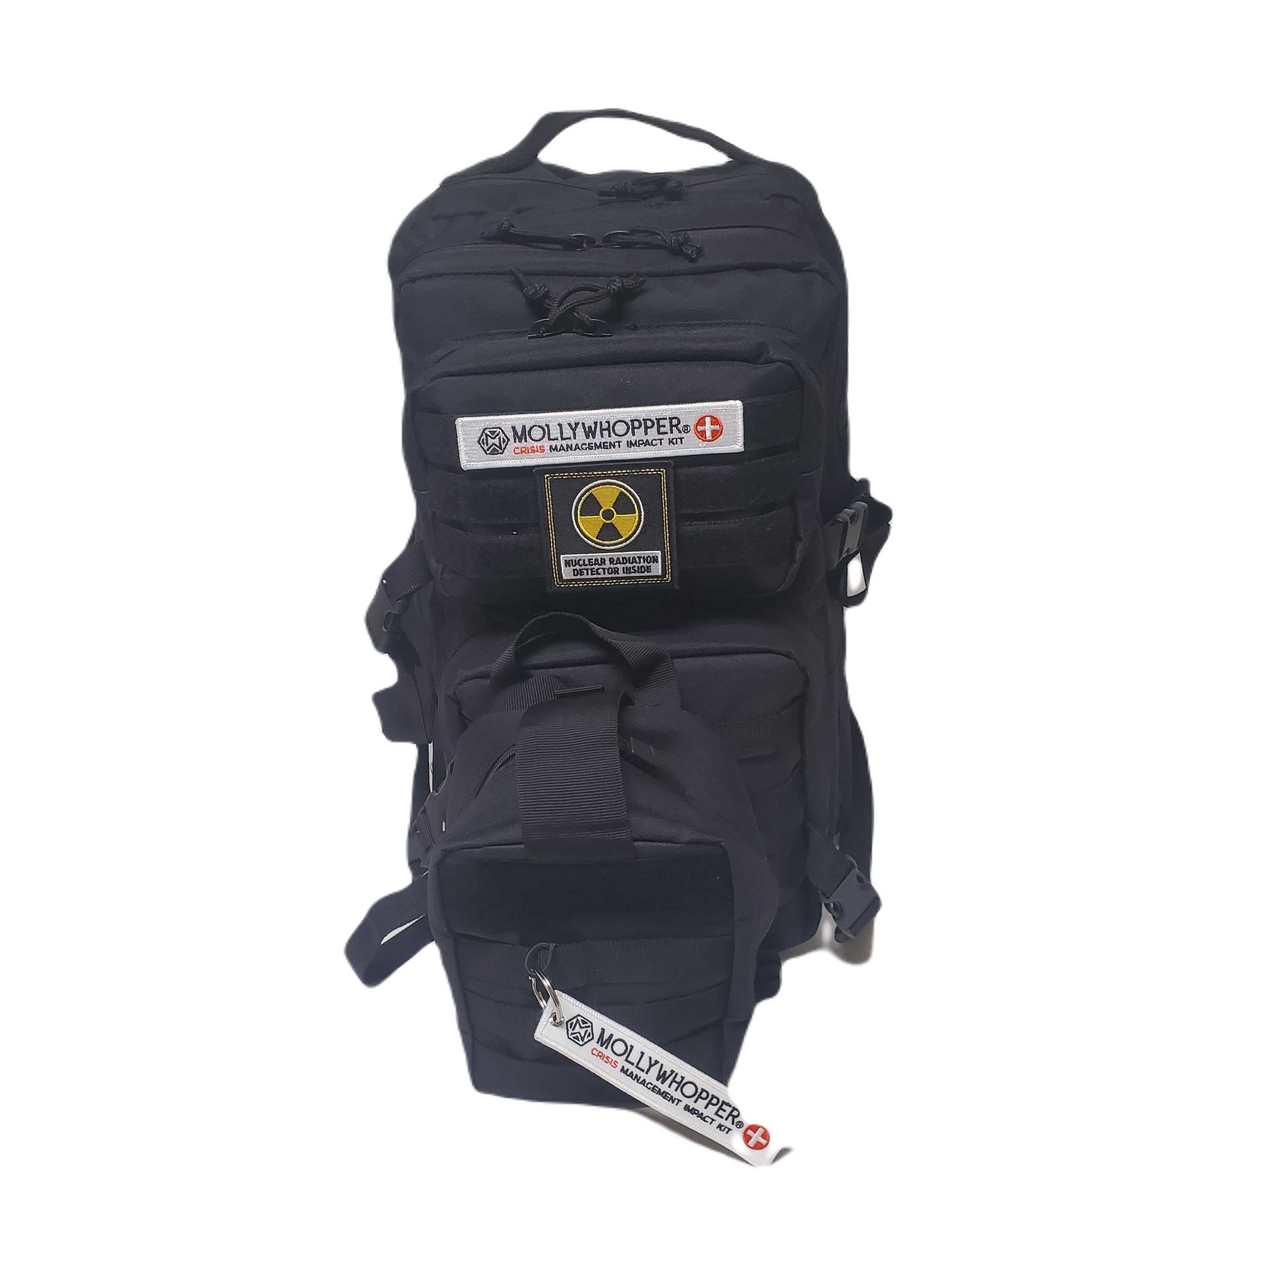 Premium Mollywhopper Crisis Management Kit, Ultimate First Aid Survival Trauma Backpack